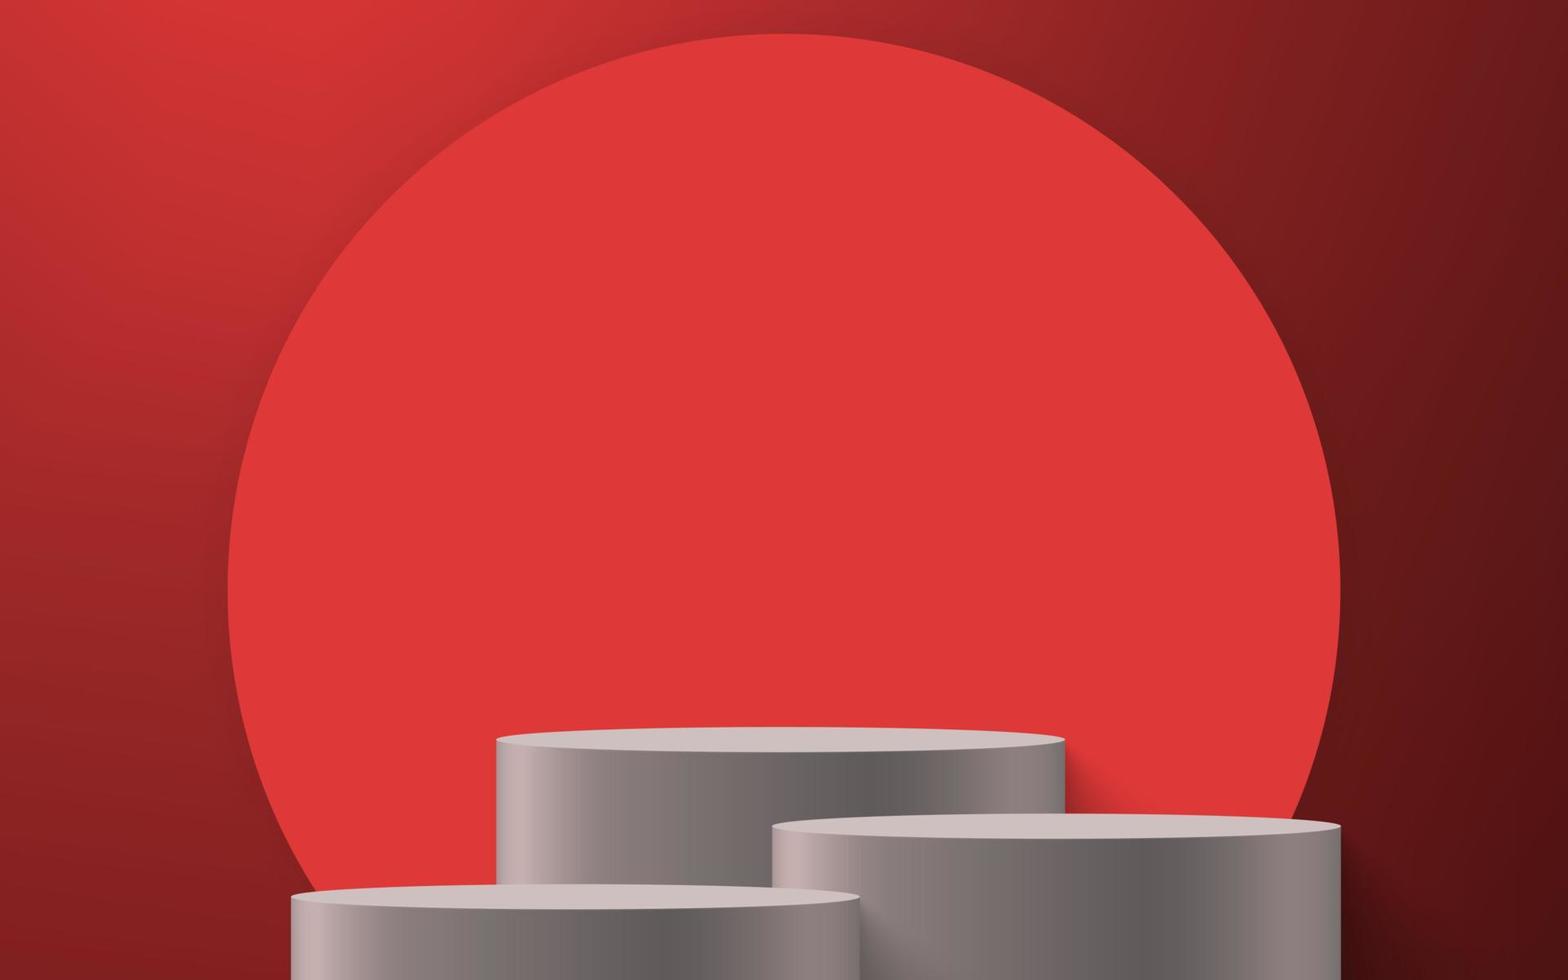 3d realistic podium or pedestal on red background. vector